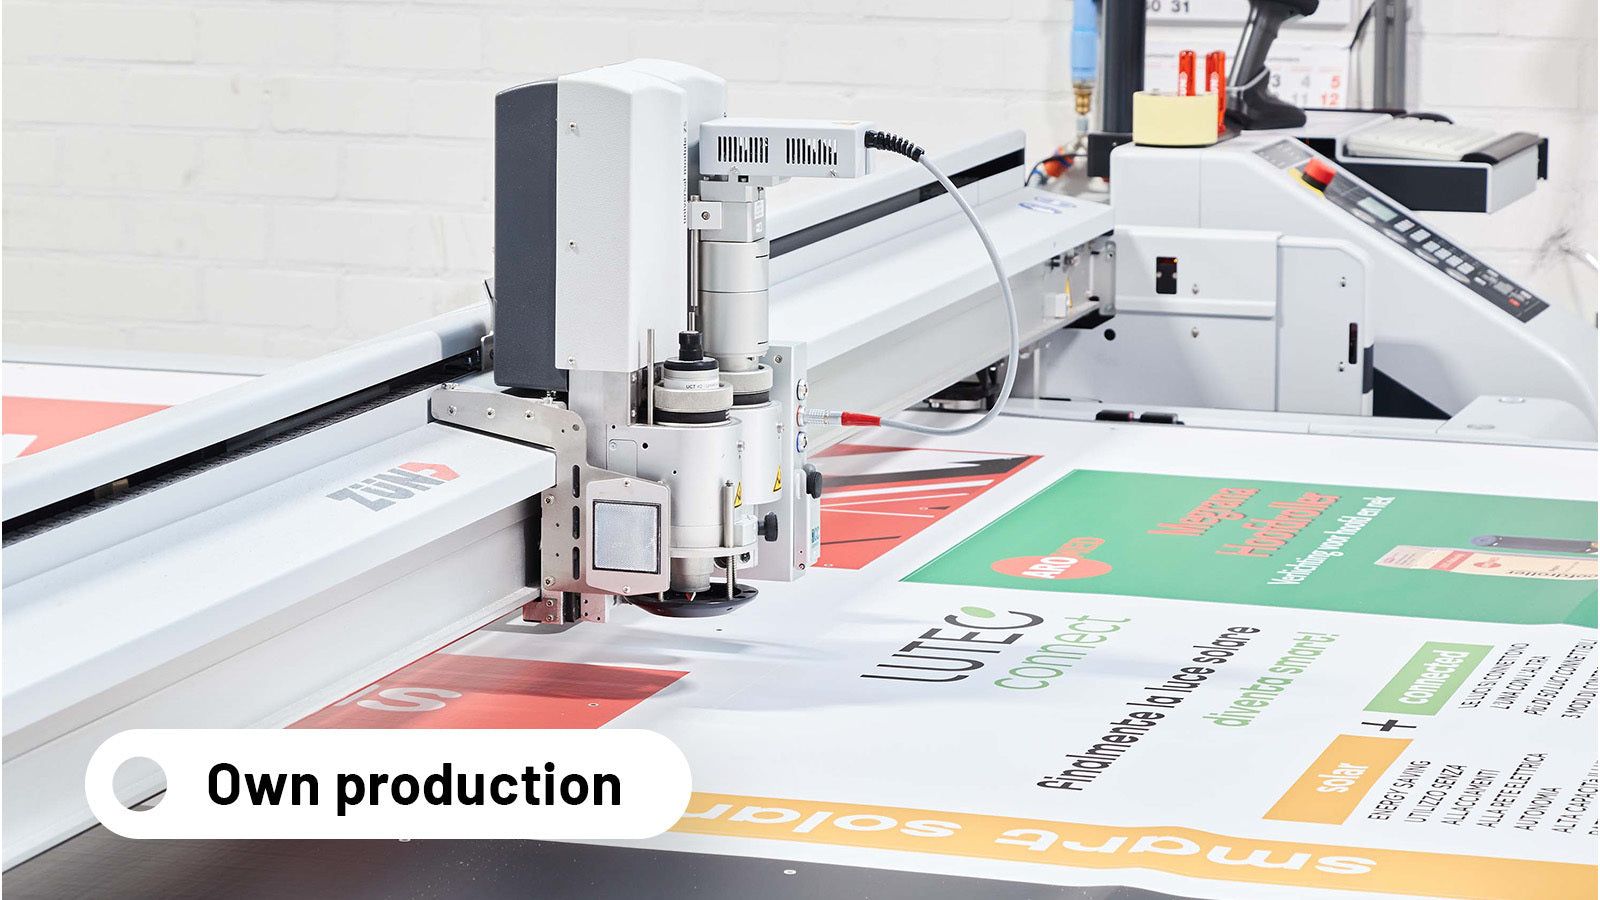 We produce your orders at Print.com production hubs